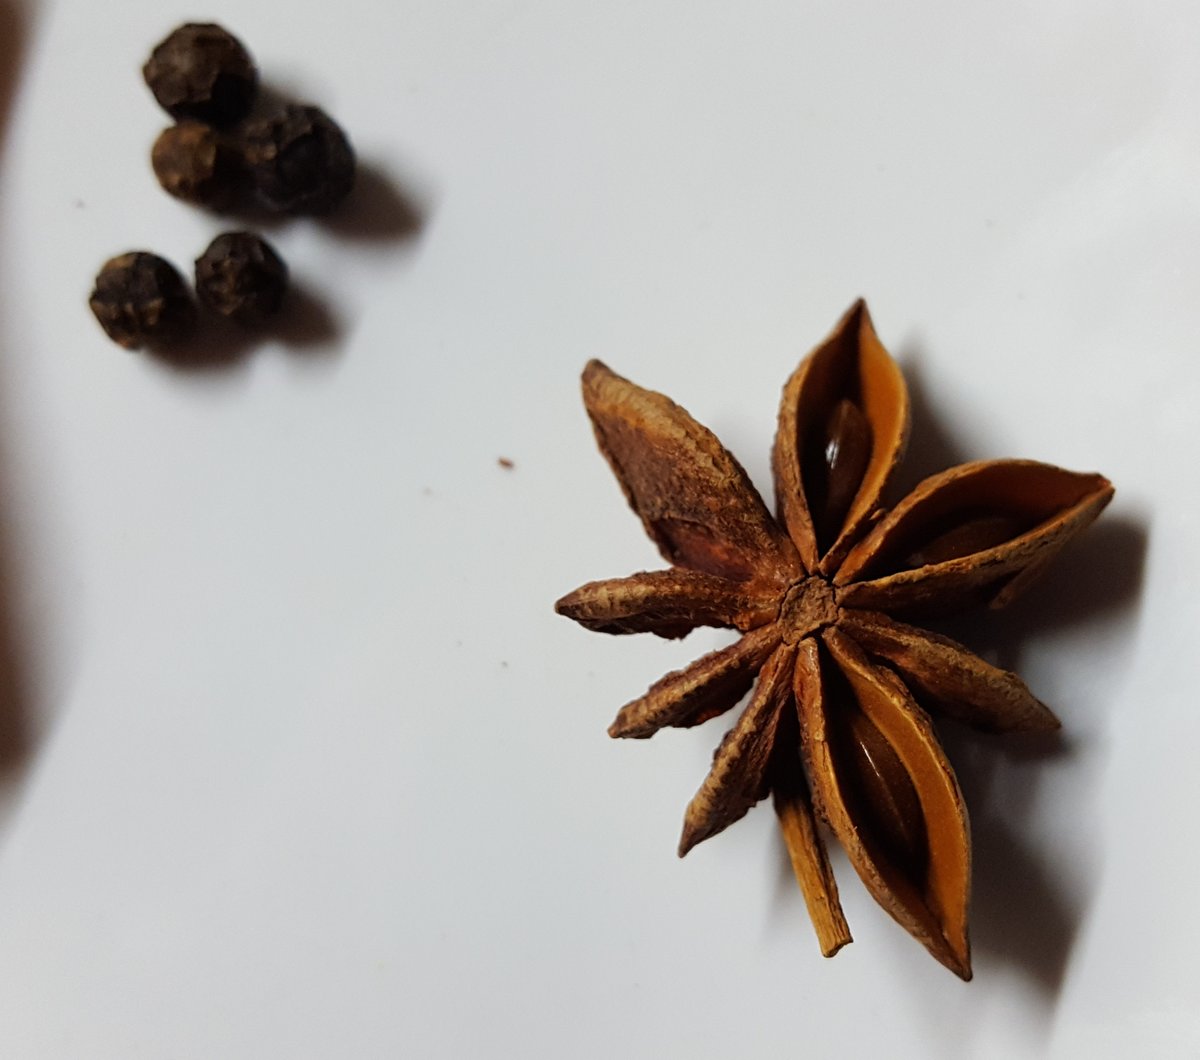 Are all these plants with ethereal oil cells closely related? Well, most of them are, except Star anise. Illicium is a distant relative of most angiosperms, being part of the Austrobaileyales, the closest cousins to most of the rest of the angiosperms!